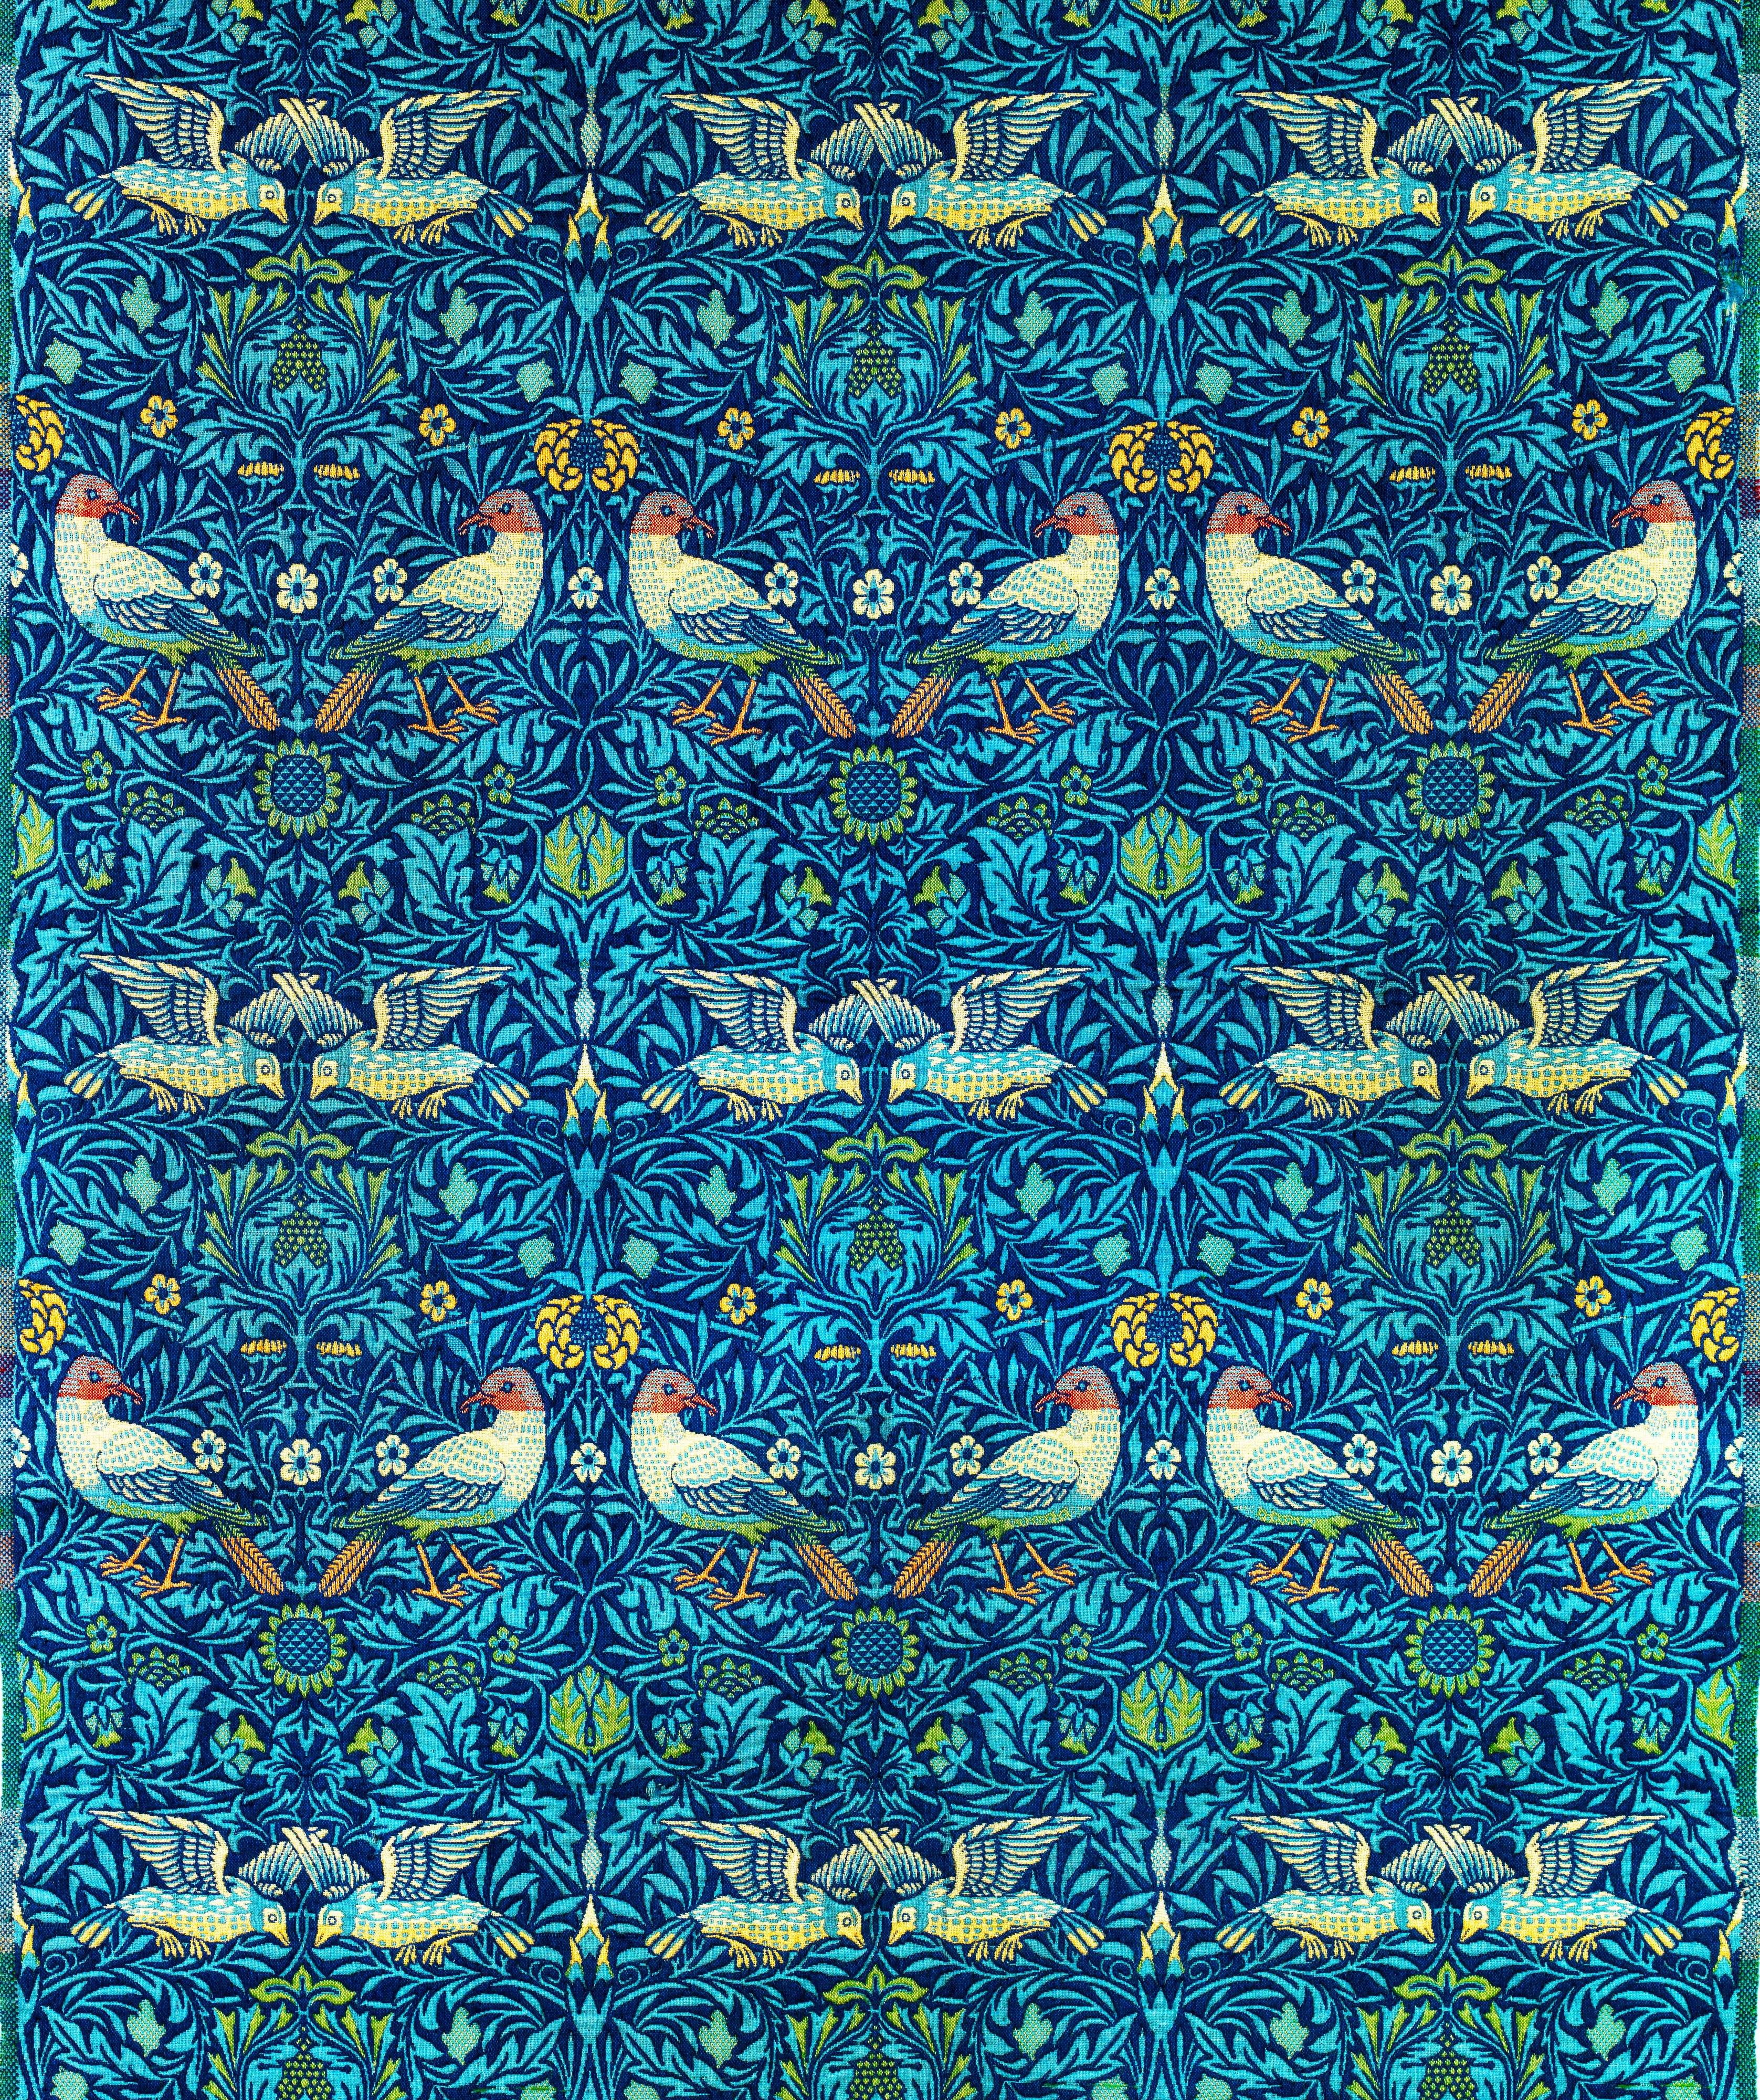 7 William Morris Wallpaper Designs You Need to See  Posh Pennies